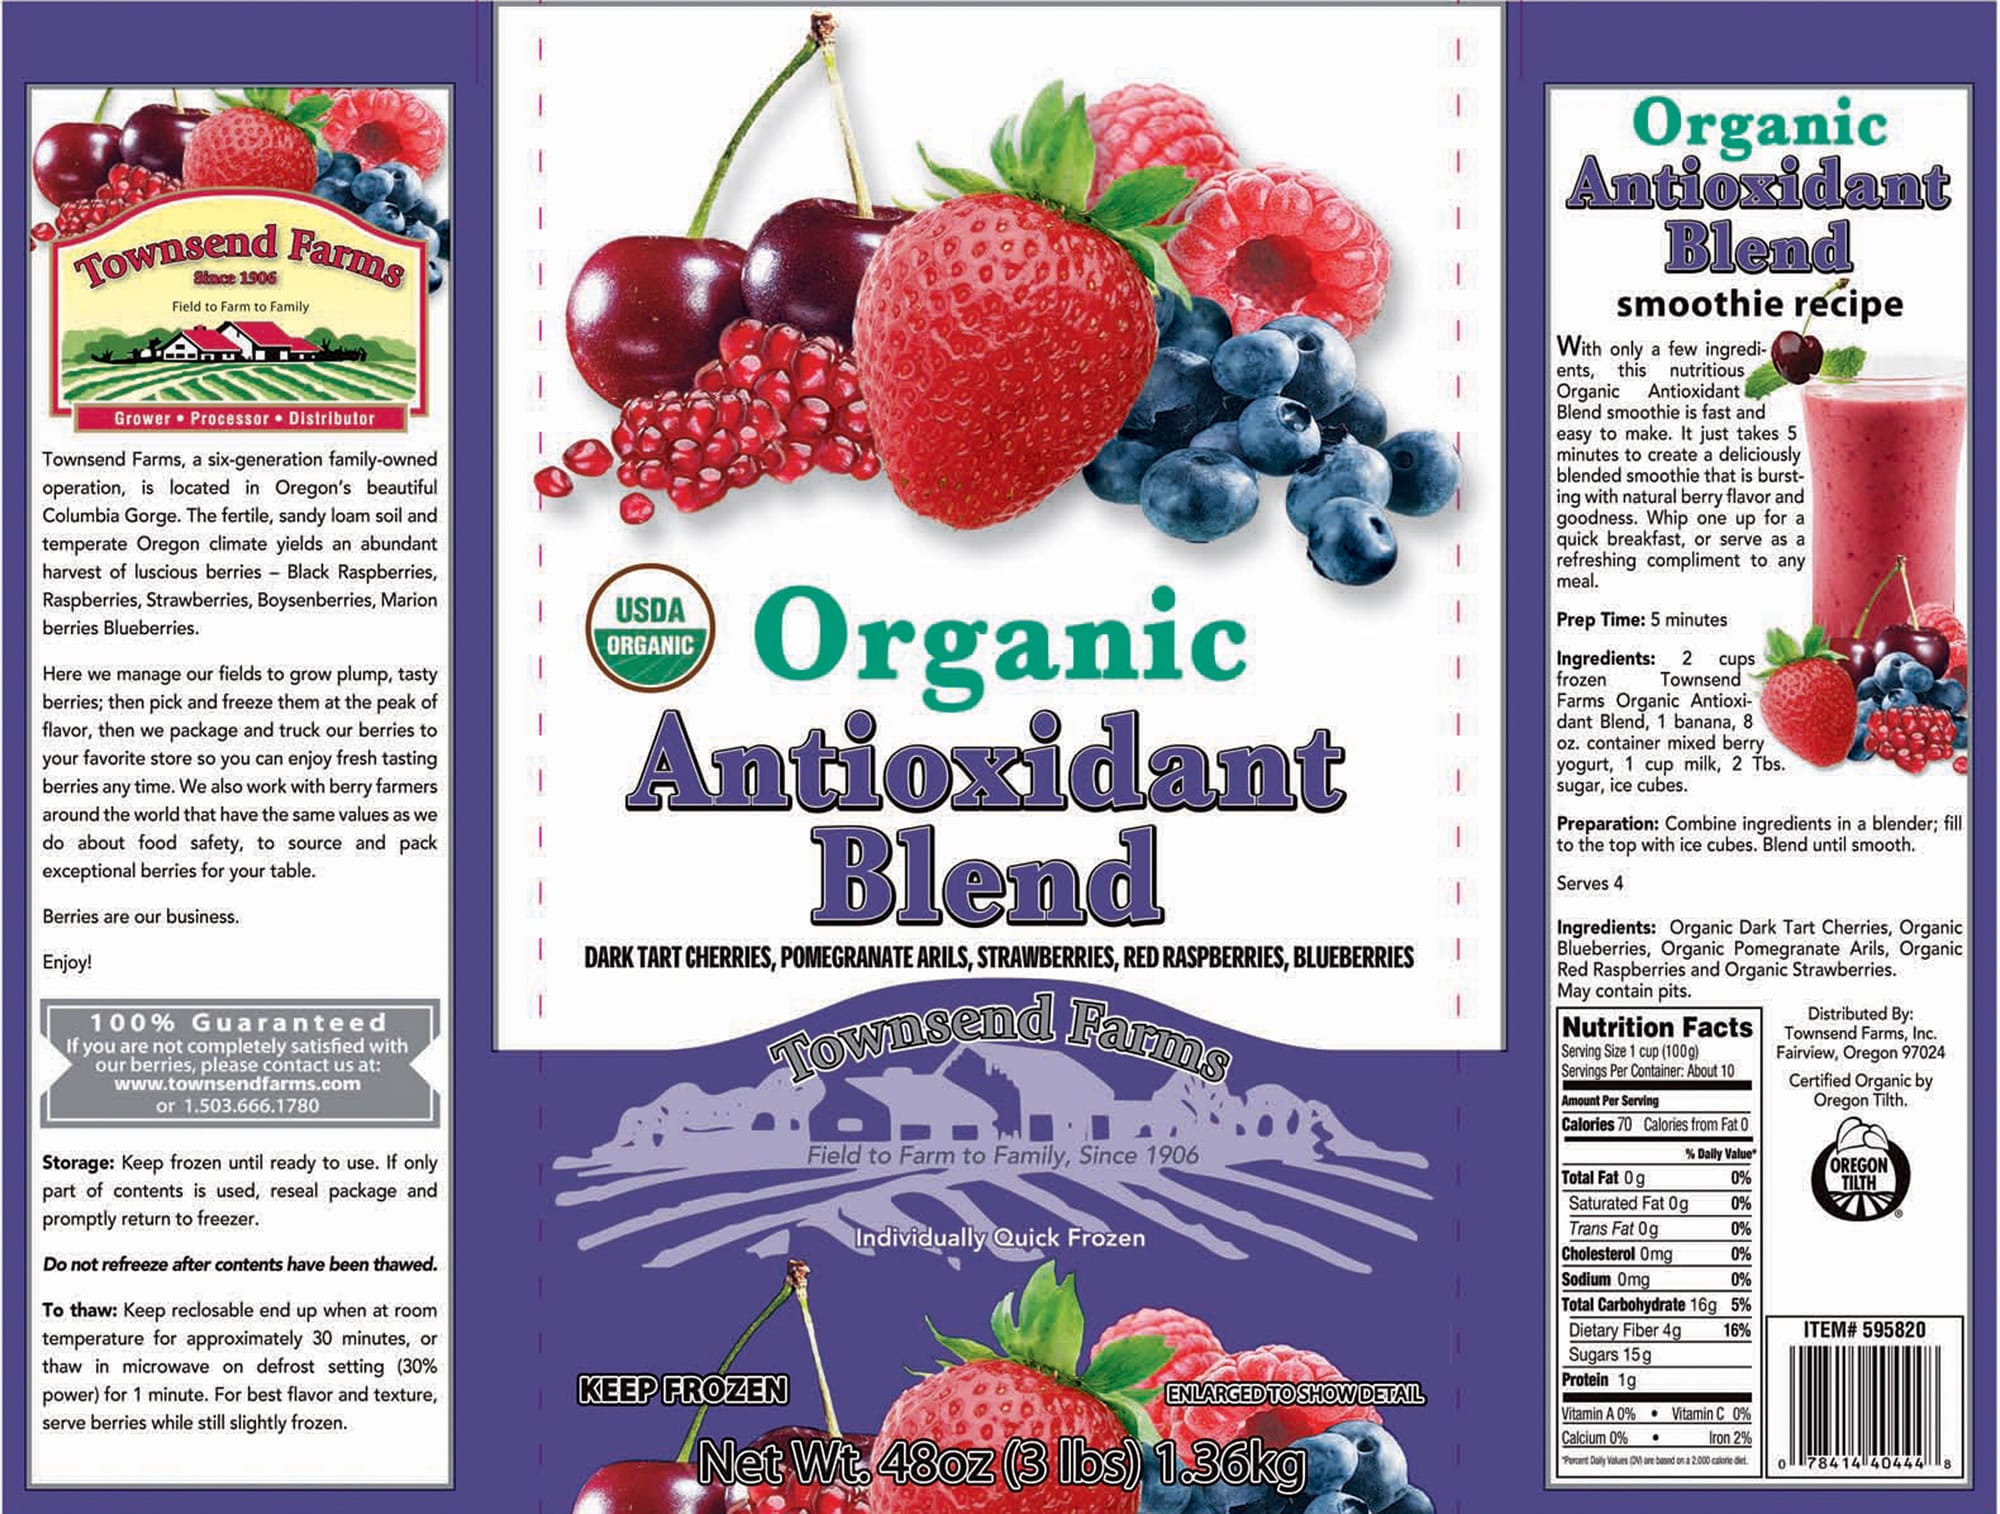 The label of Townsend Farms of Fairview, Ore., Organic Antioxidant Blend, packaged under the Townsend Farms label at Costco and under the Harris Teeter brand at those stores.